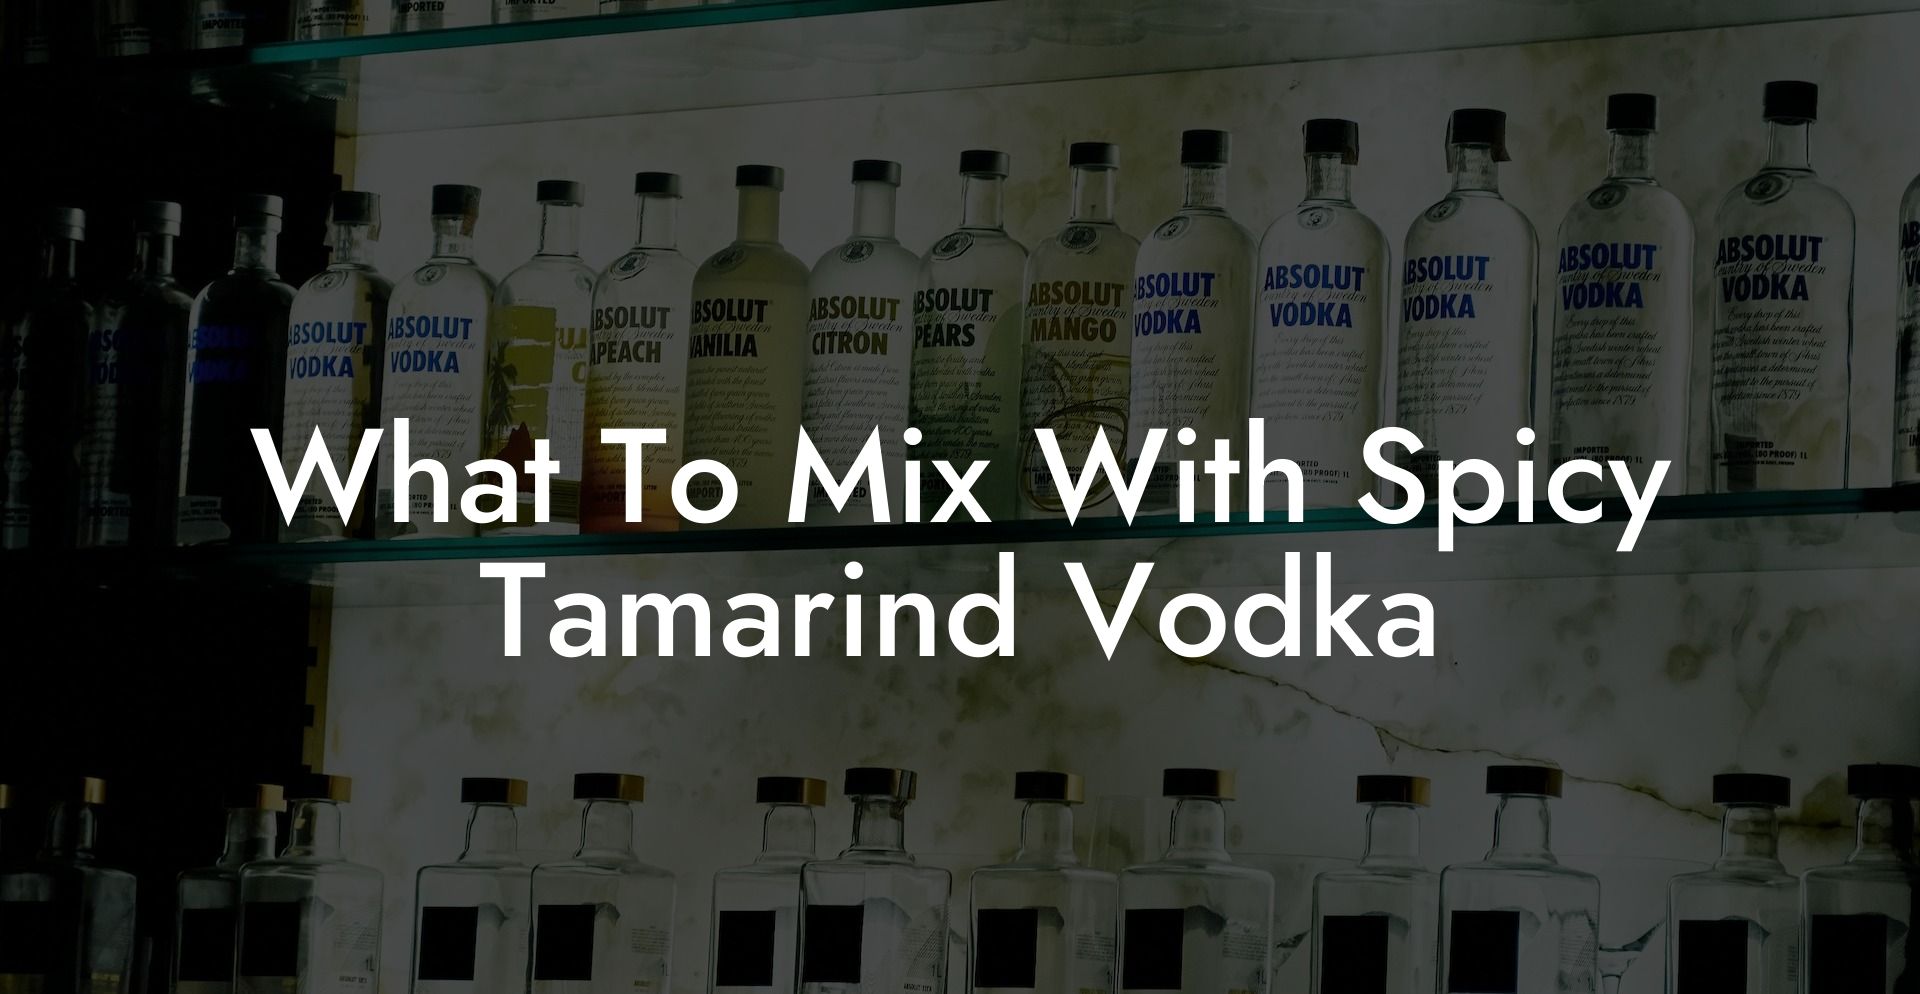 What To Mix With Spicy Tamarind Vodka